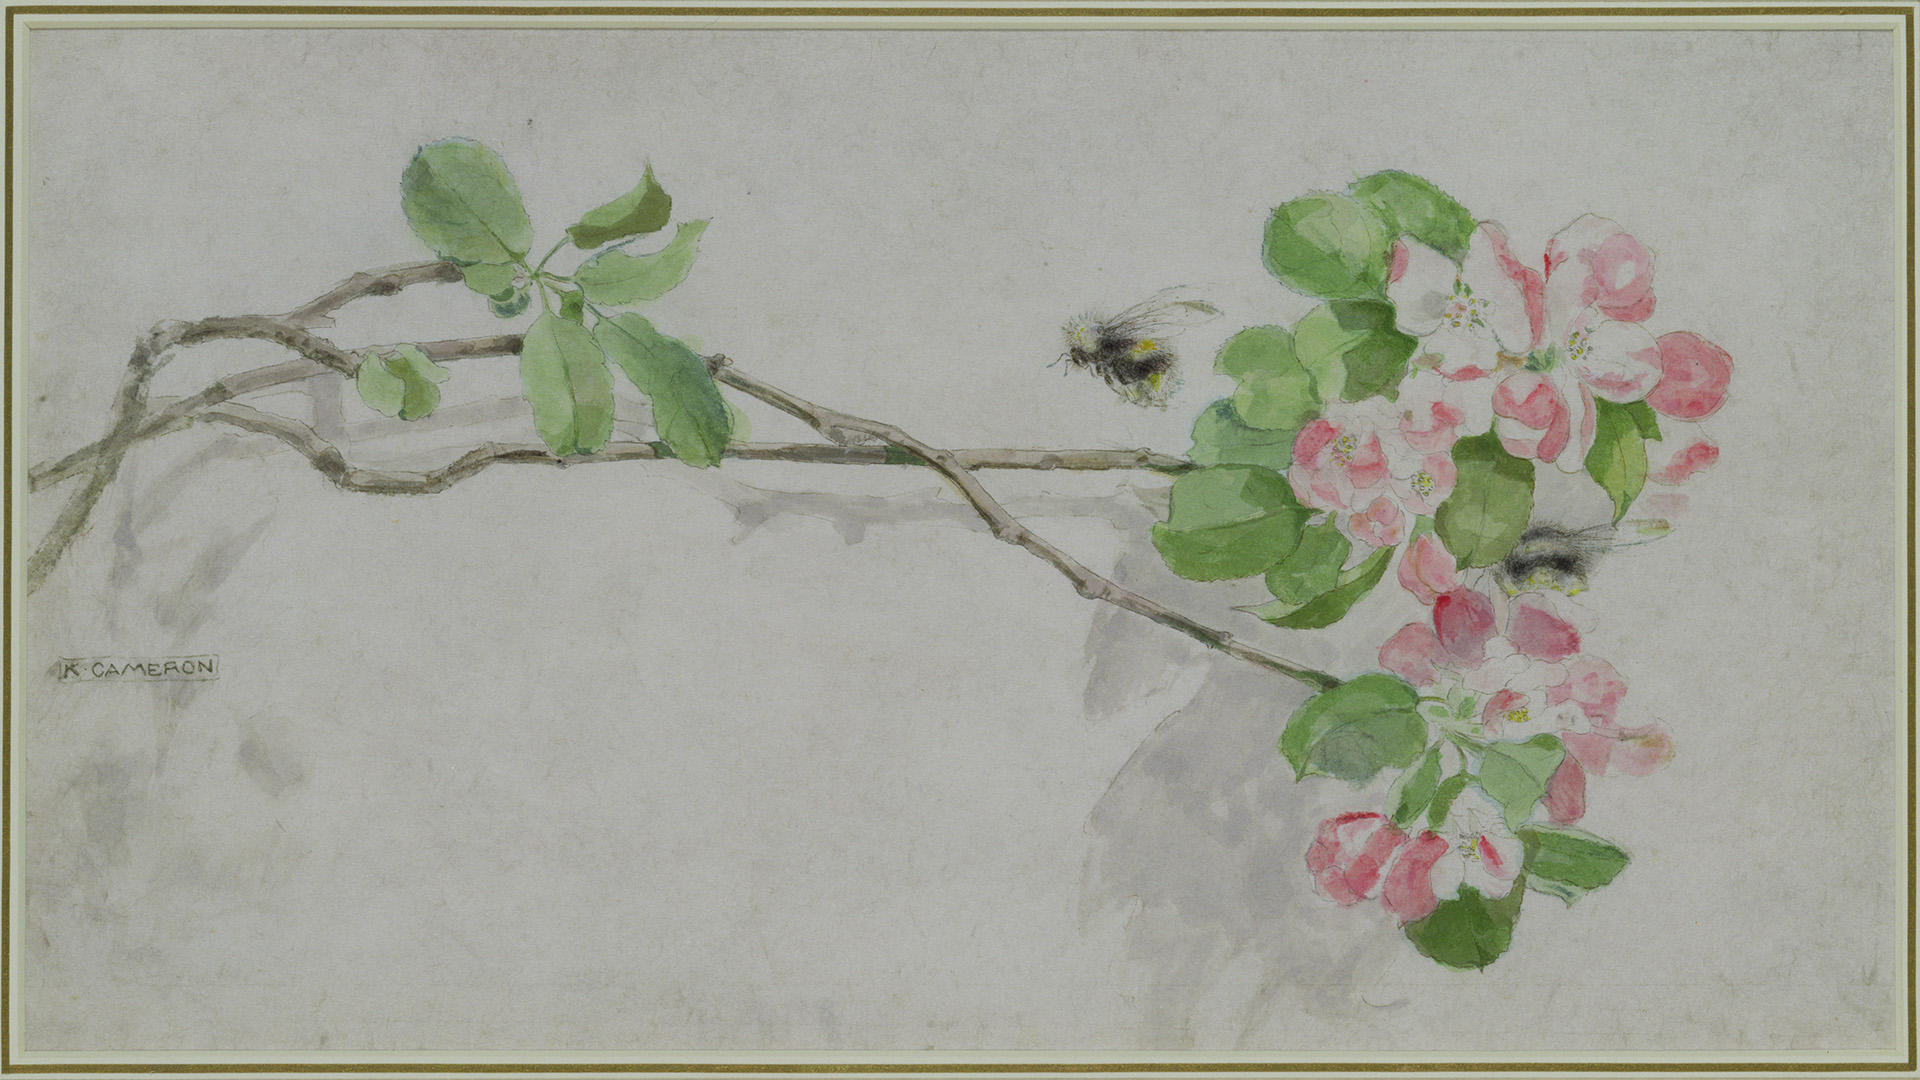 Cameron, Katherine, Apple Blossom and Bees, Unknown. Pencil and watercolour on paper. The Fleming Collection ⒸThe Artist's Estate